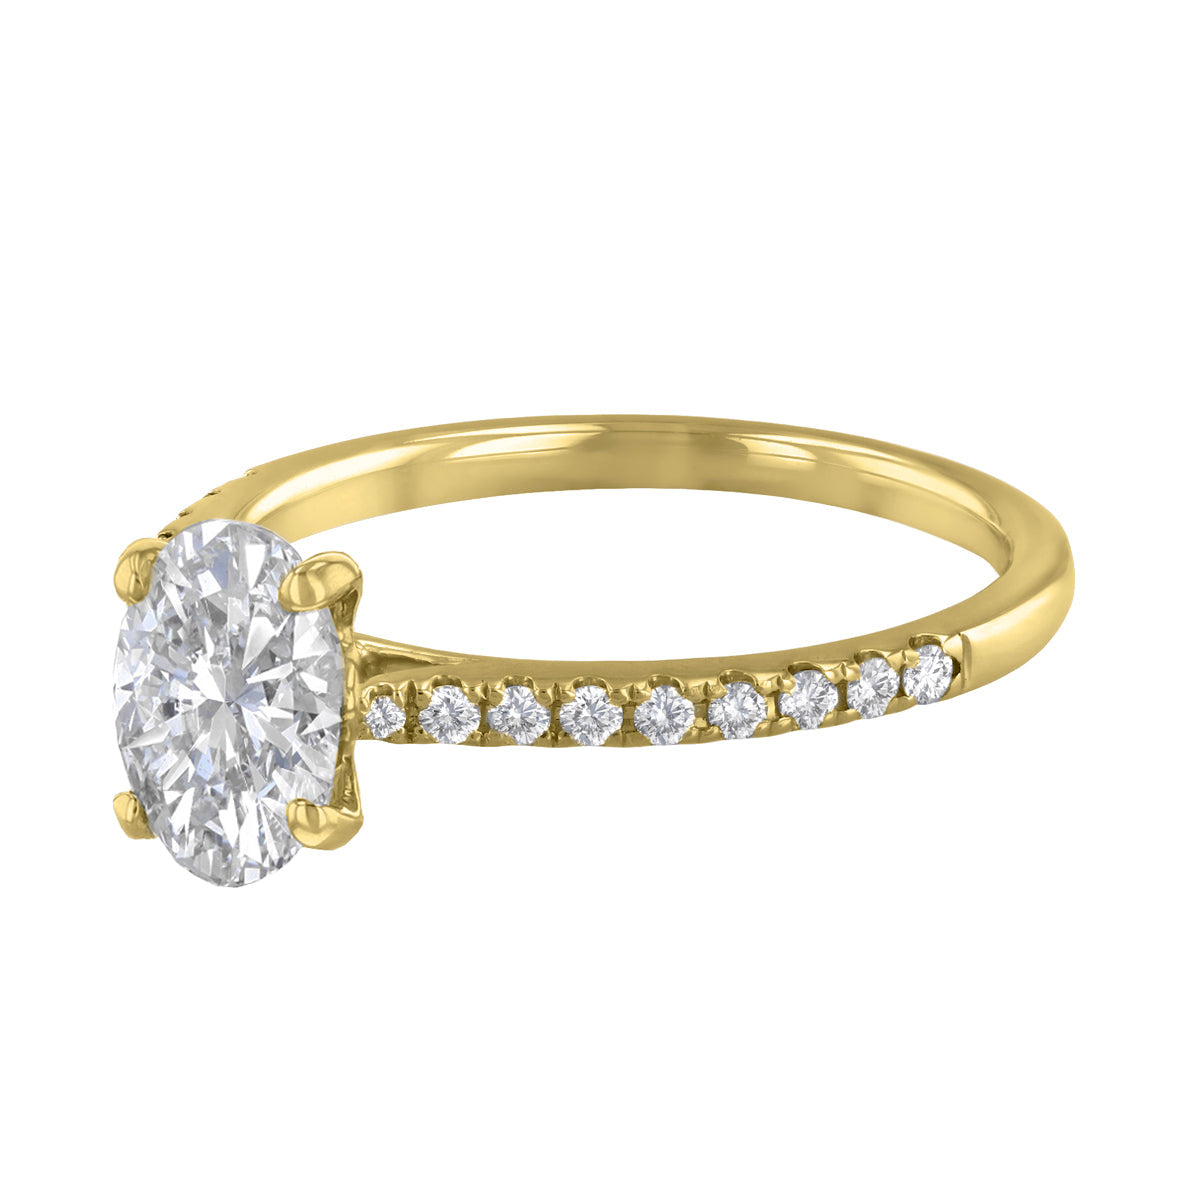 1.20ct Poppy Shoulder Set Oval Cut Diamond Solitaire Engagement Ring | 18ct Yellow Gold